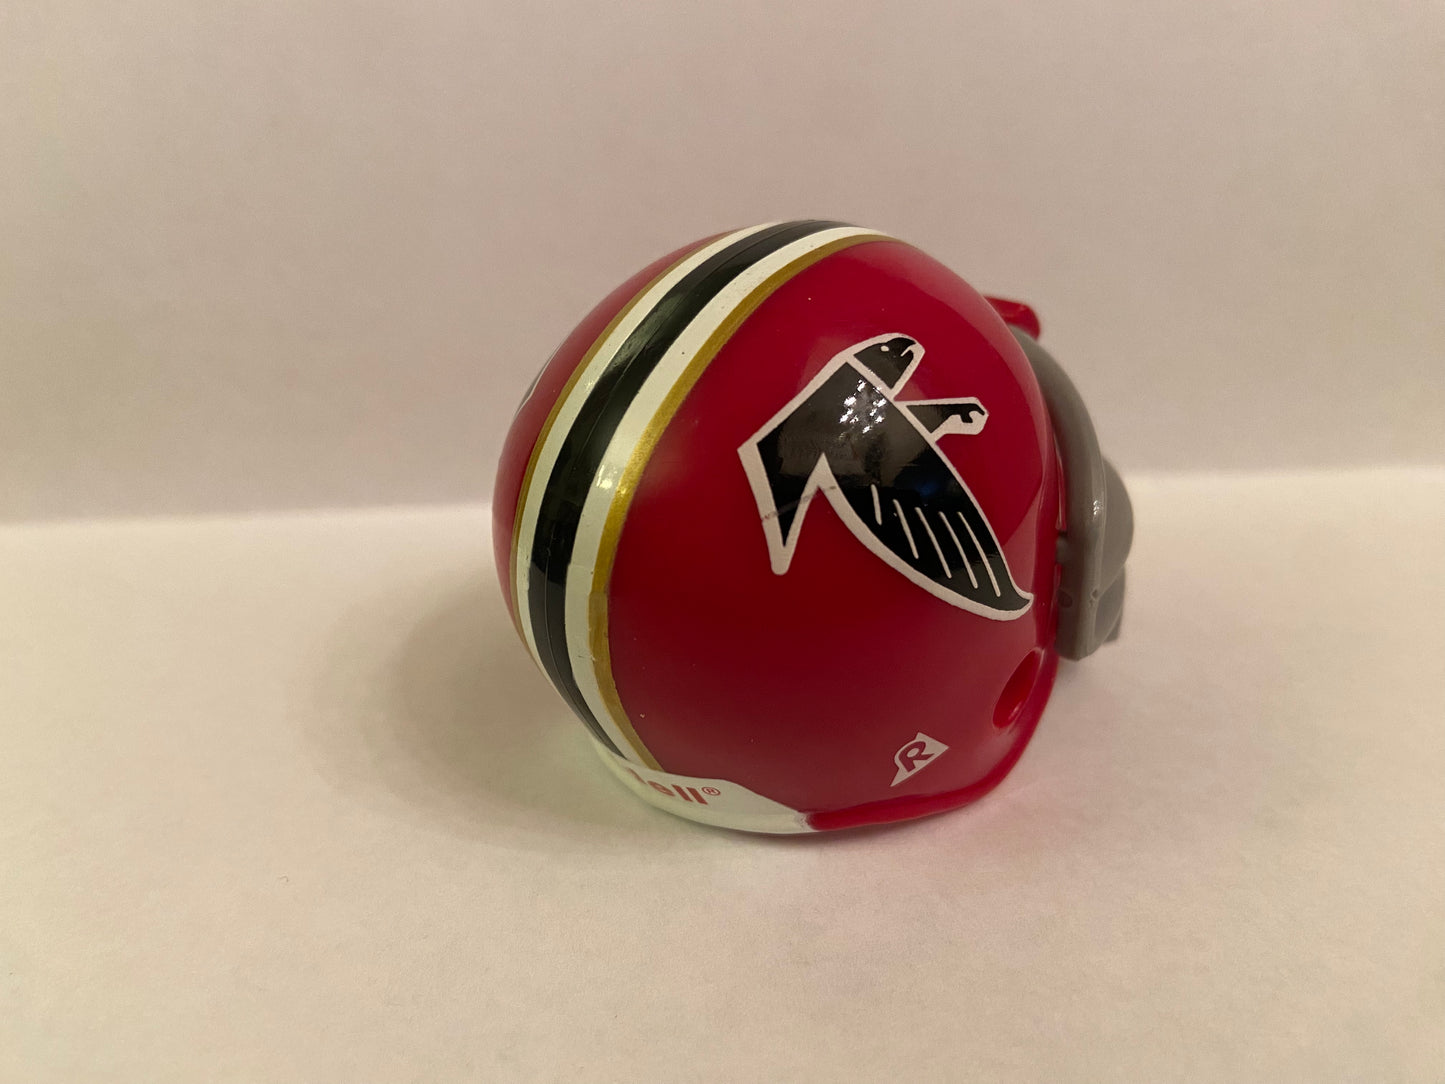 Atlanta Falcons Riddell NFL Pocket Pro Helmet 1966-1969 Throwback (Red helmet with Gold Stripes and Grey Mask) from series 1  WESTBROOKSPORTSCARDS   